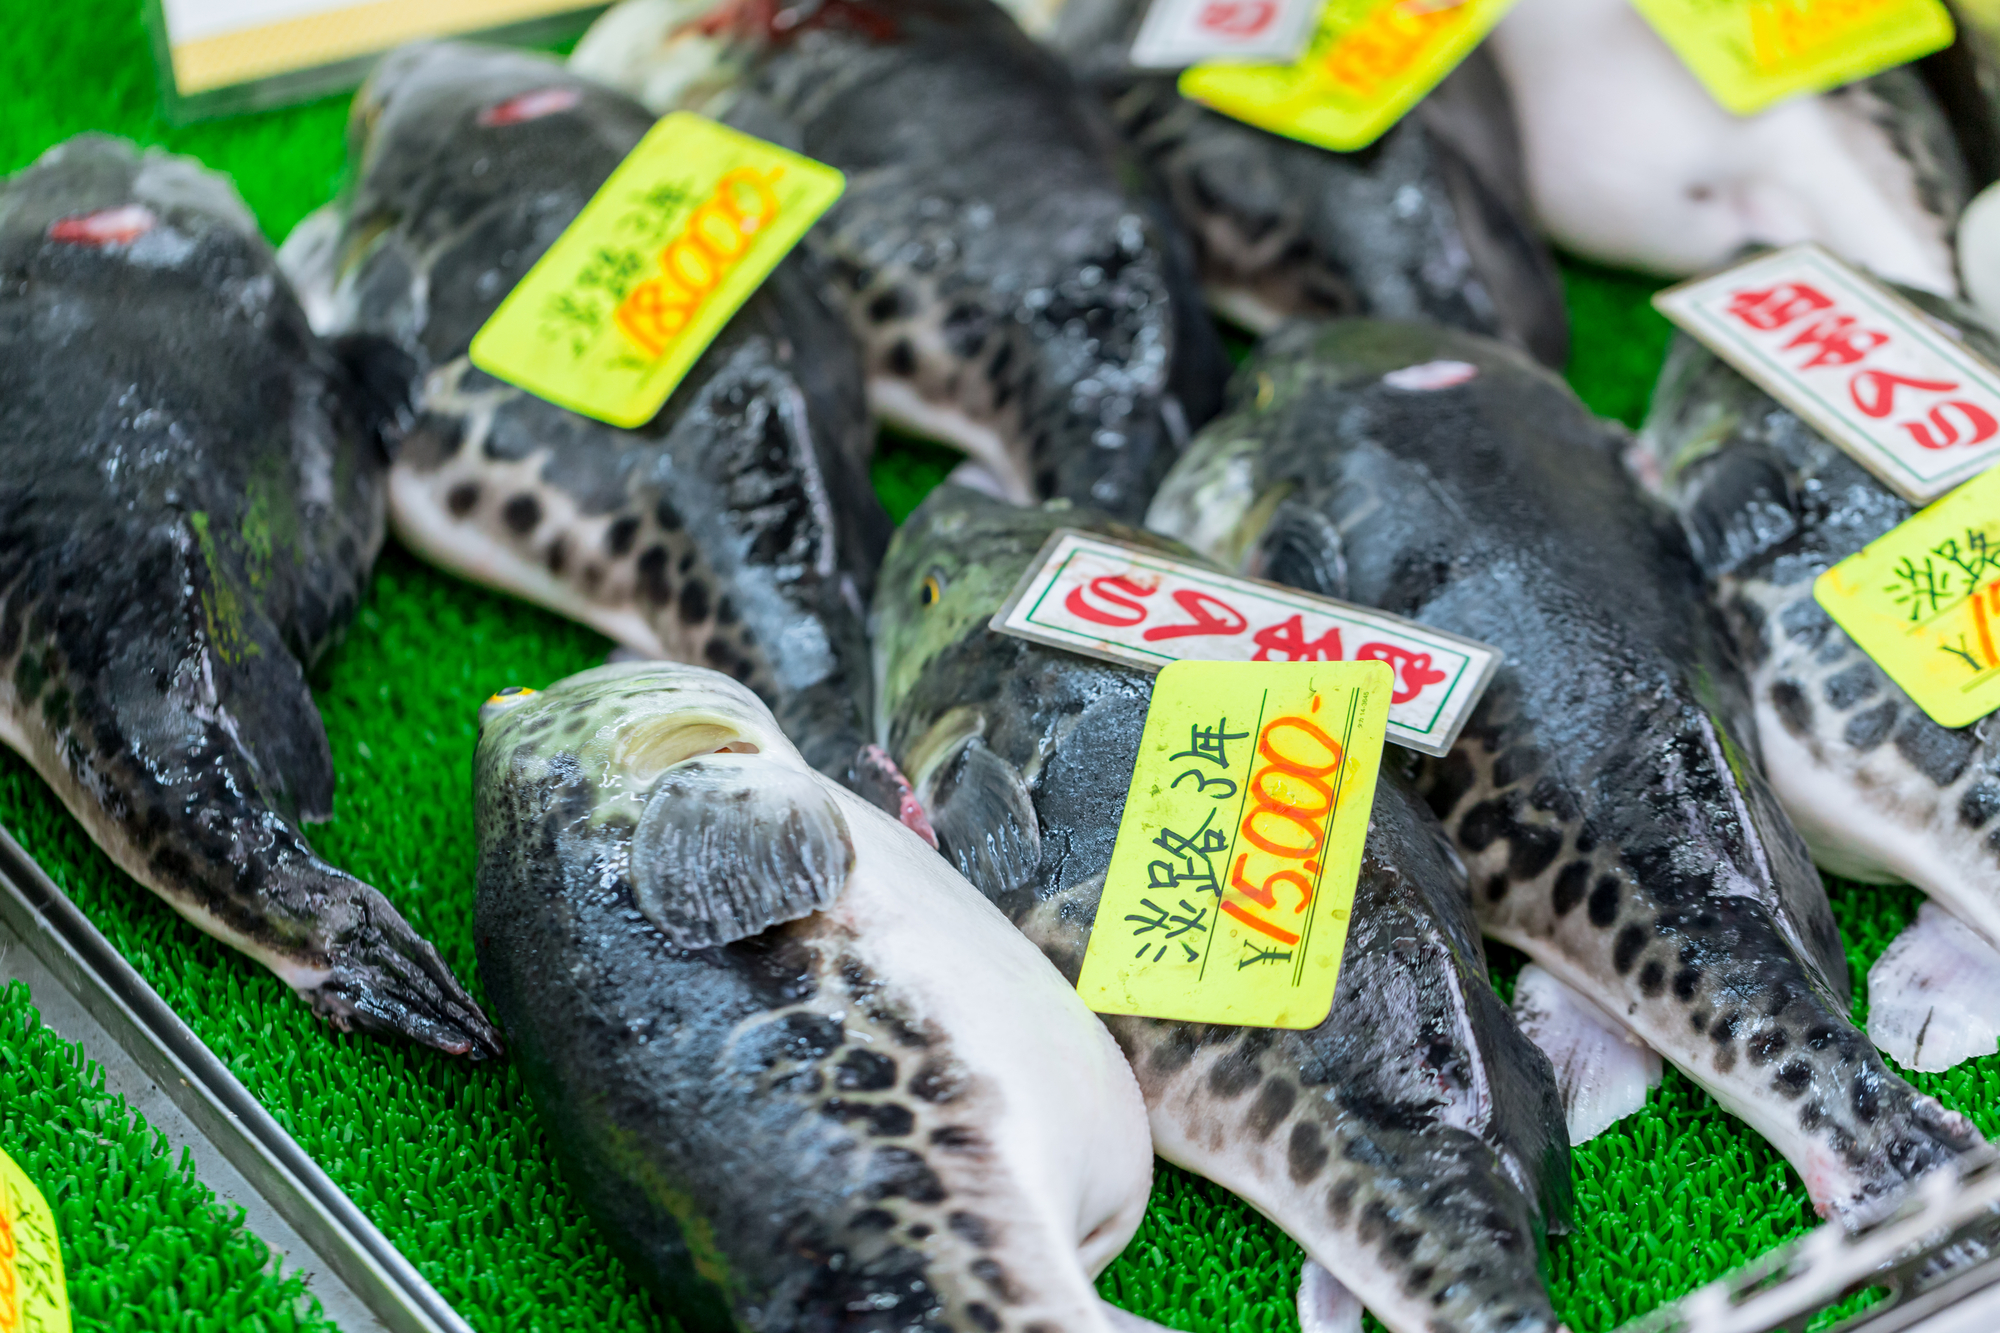 In Japan, You Can Order Sushi with Poisonous Deadly Fish